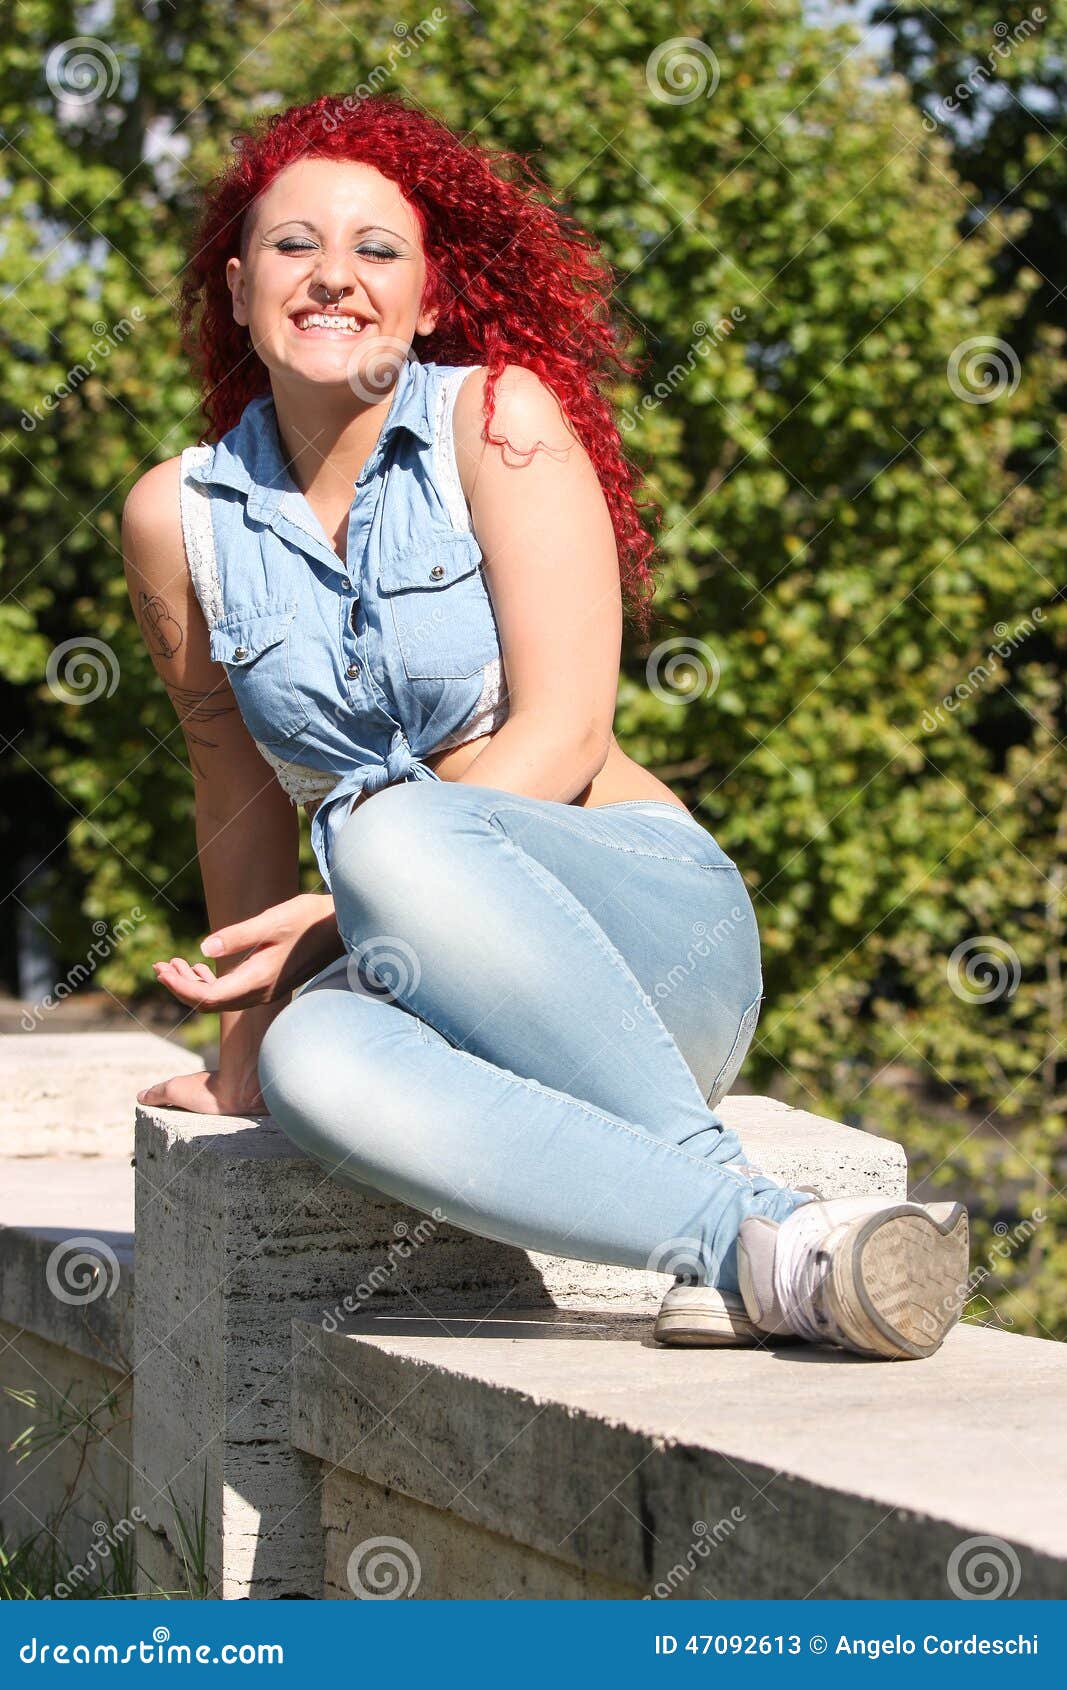 Young Girl Smiling Red Curly Hair And Piercing Outdoor